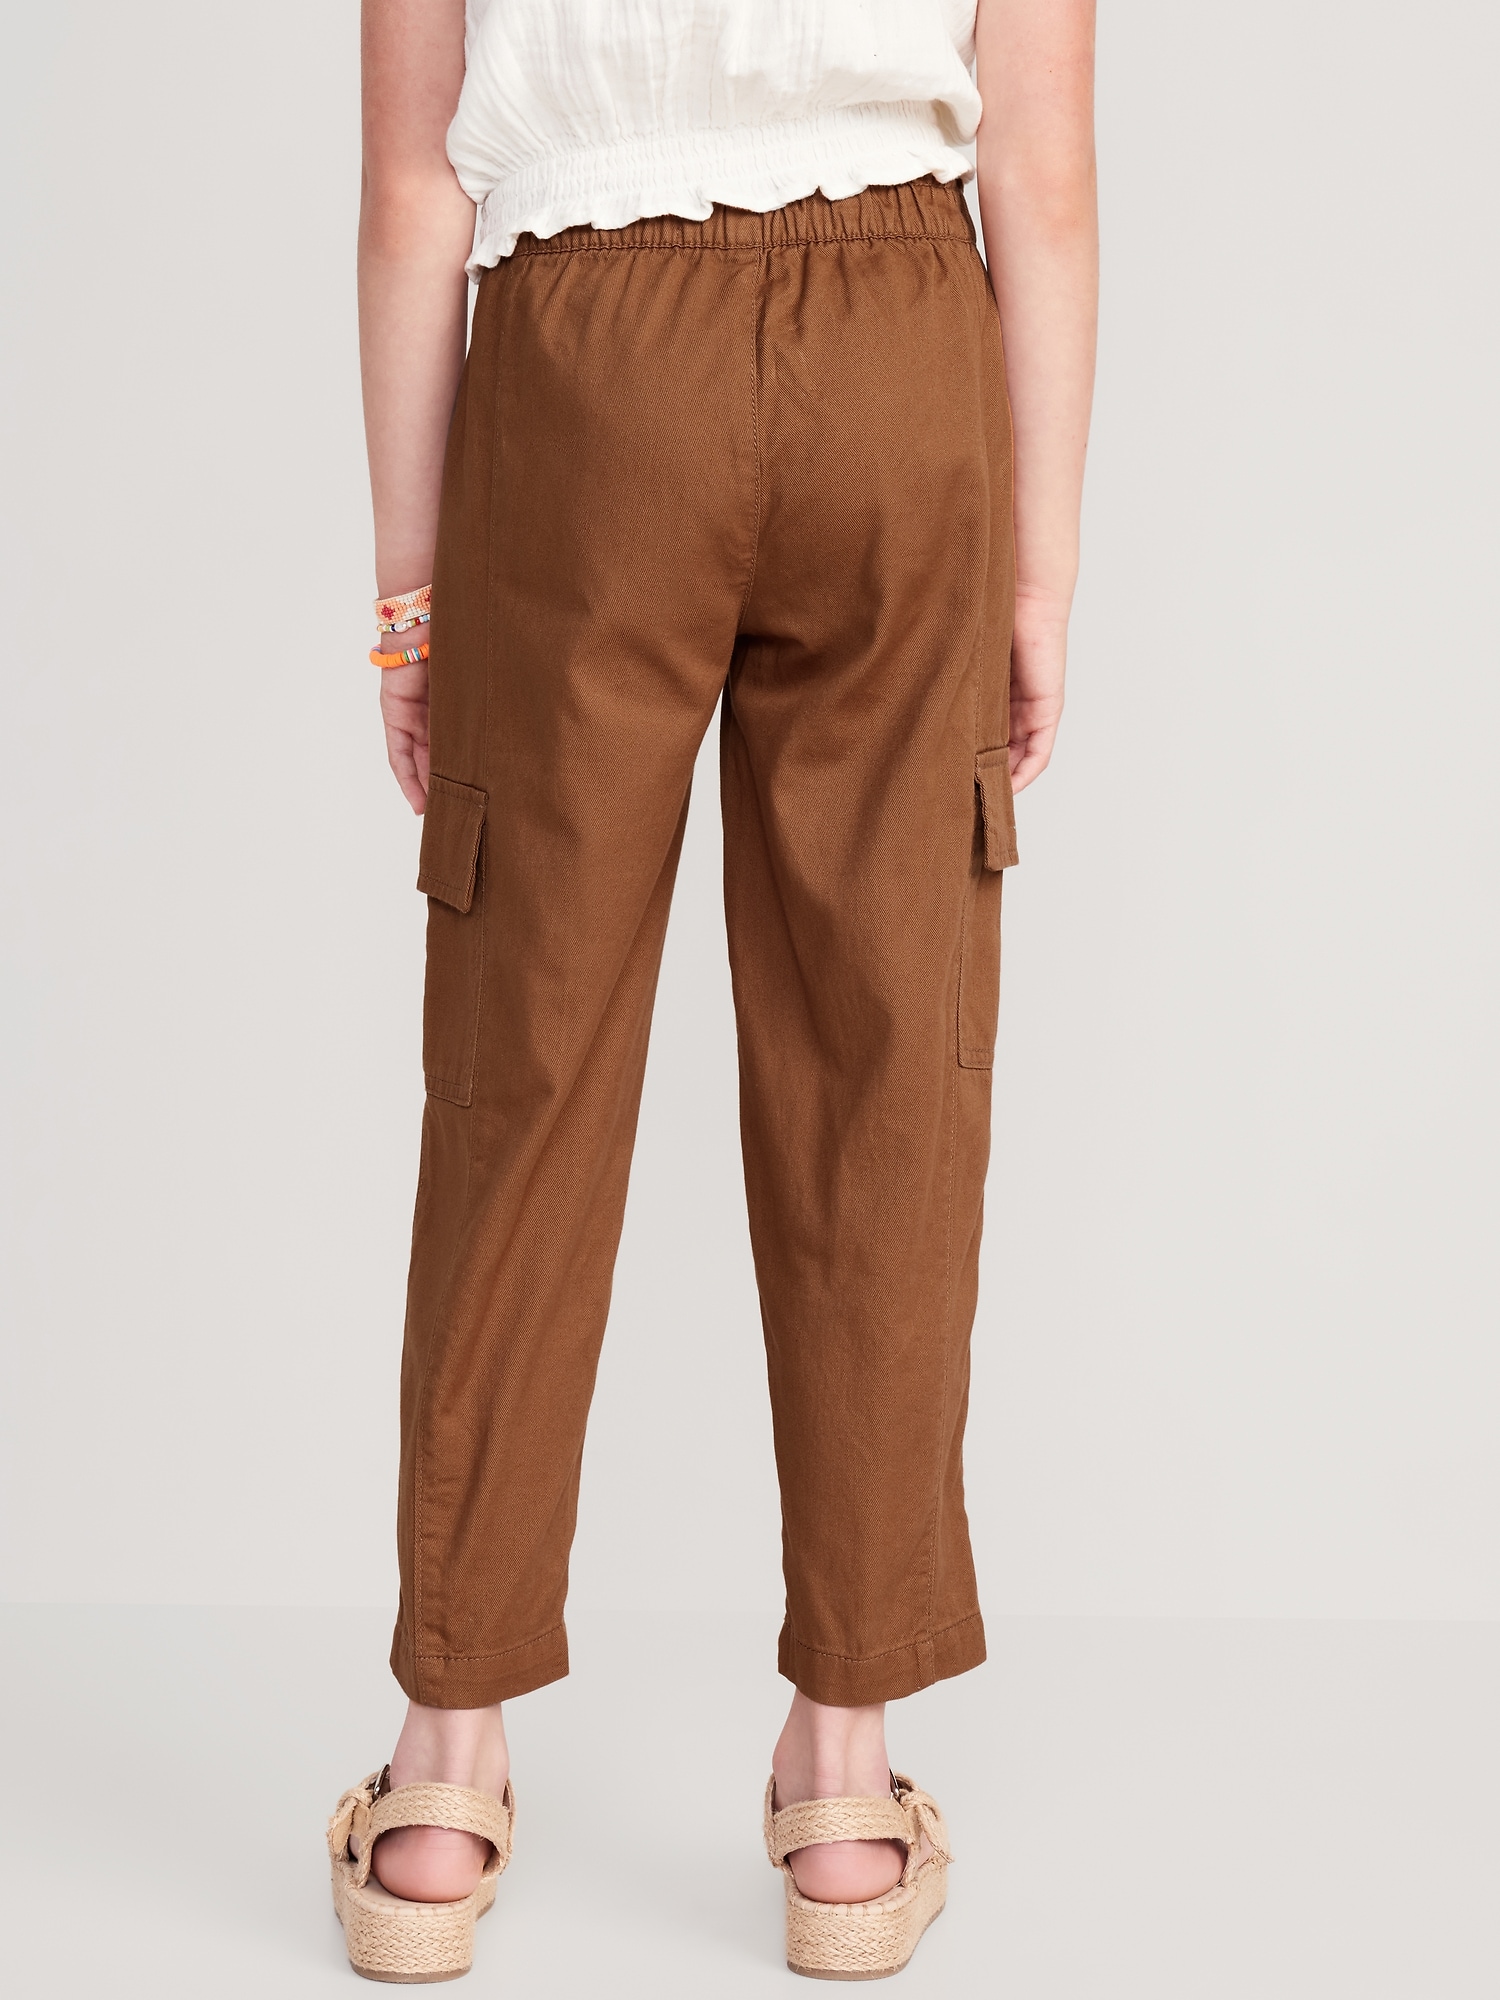 Cargo Trousers for Girls in Loose-Fitting Fabric - old rose, Girls